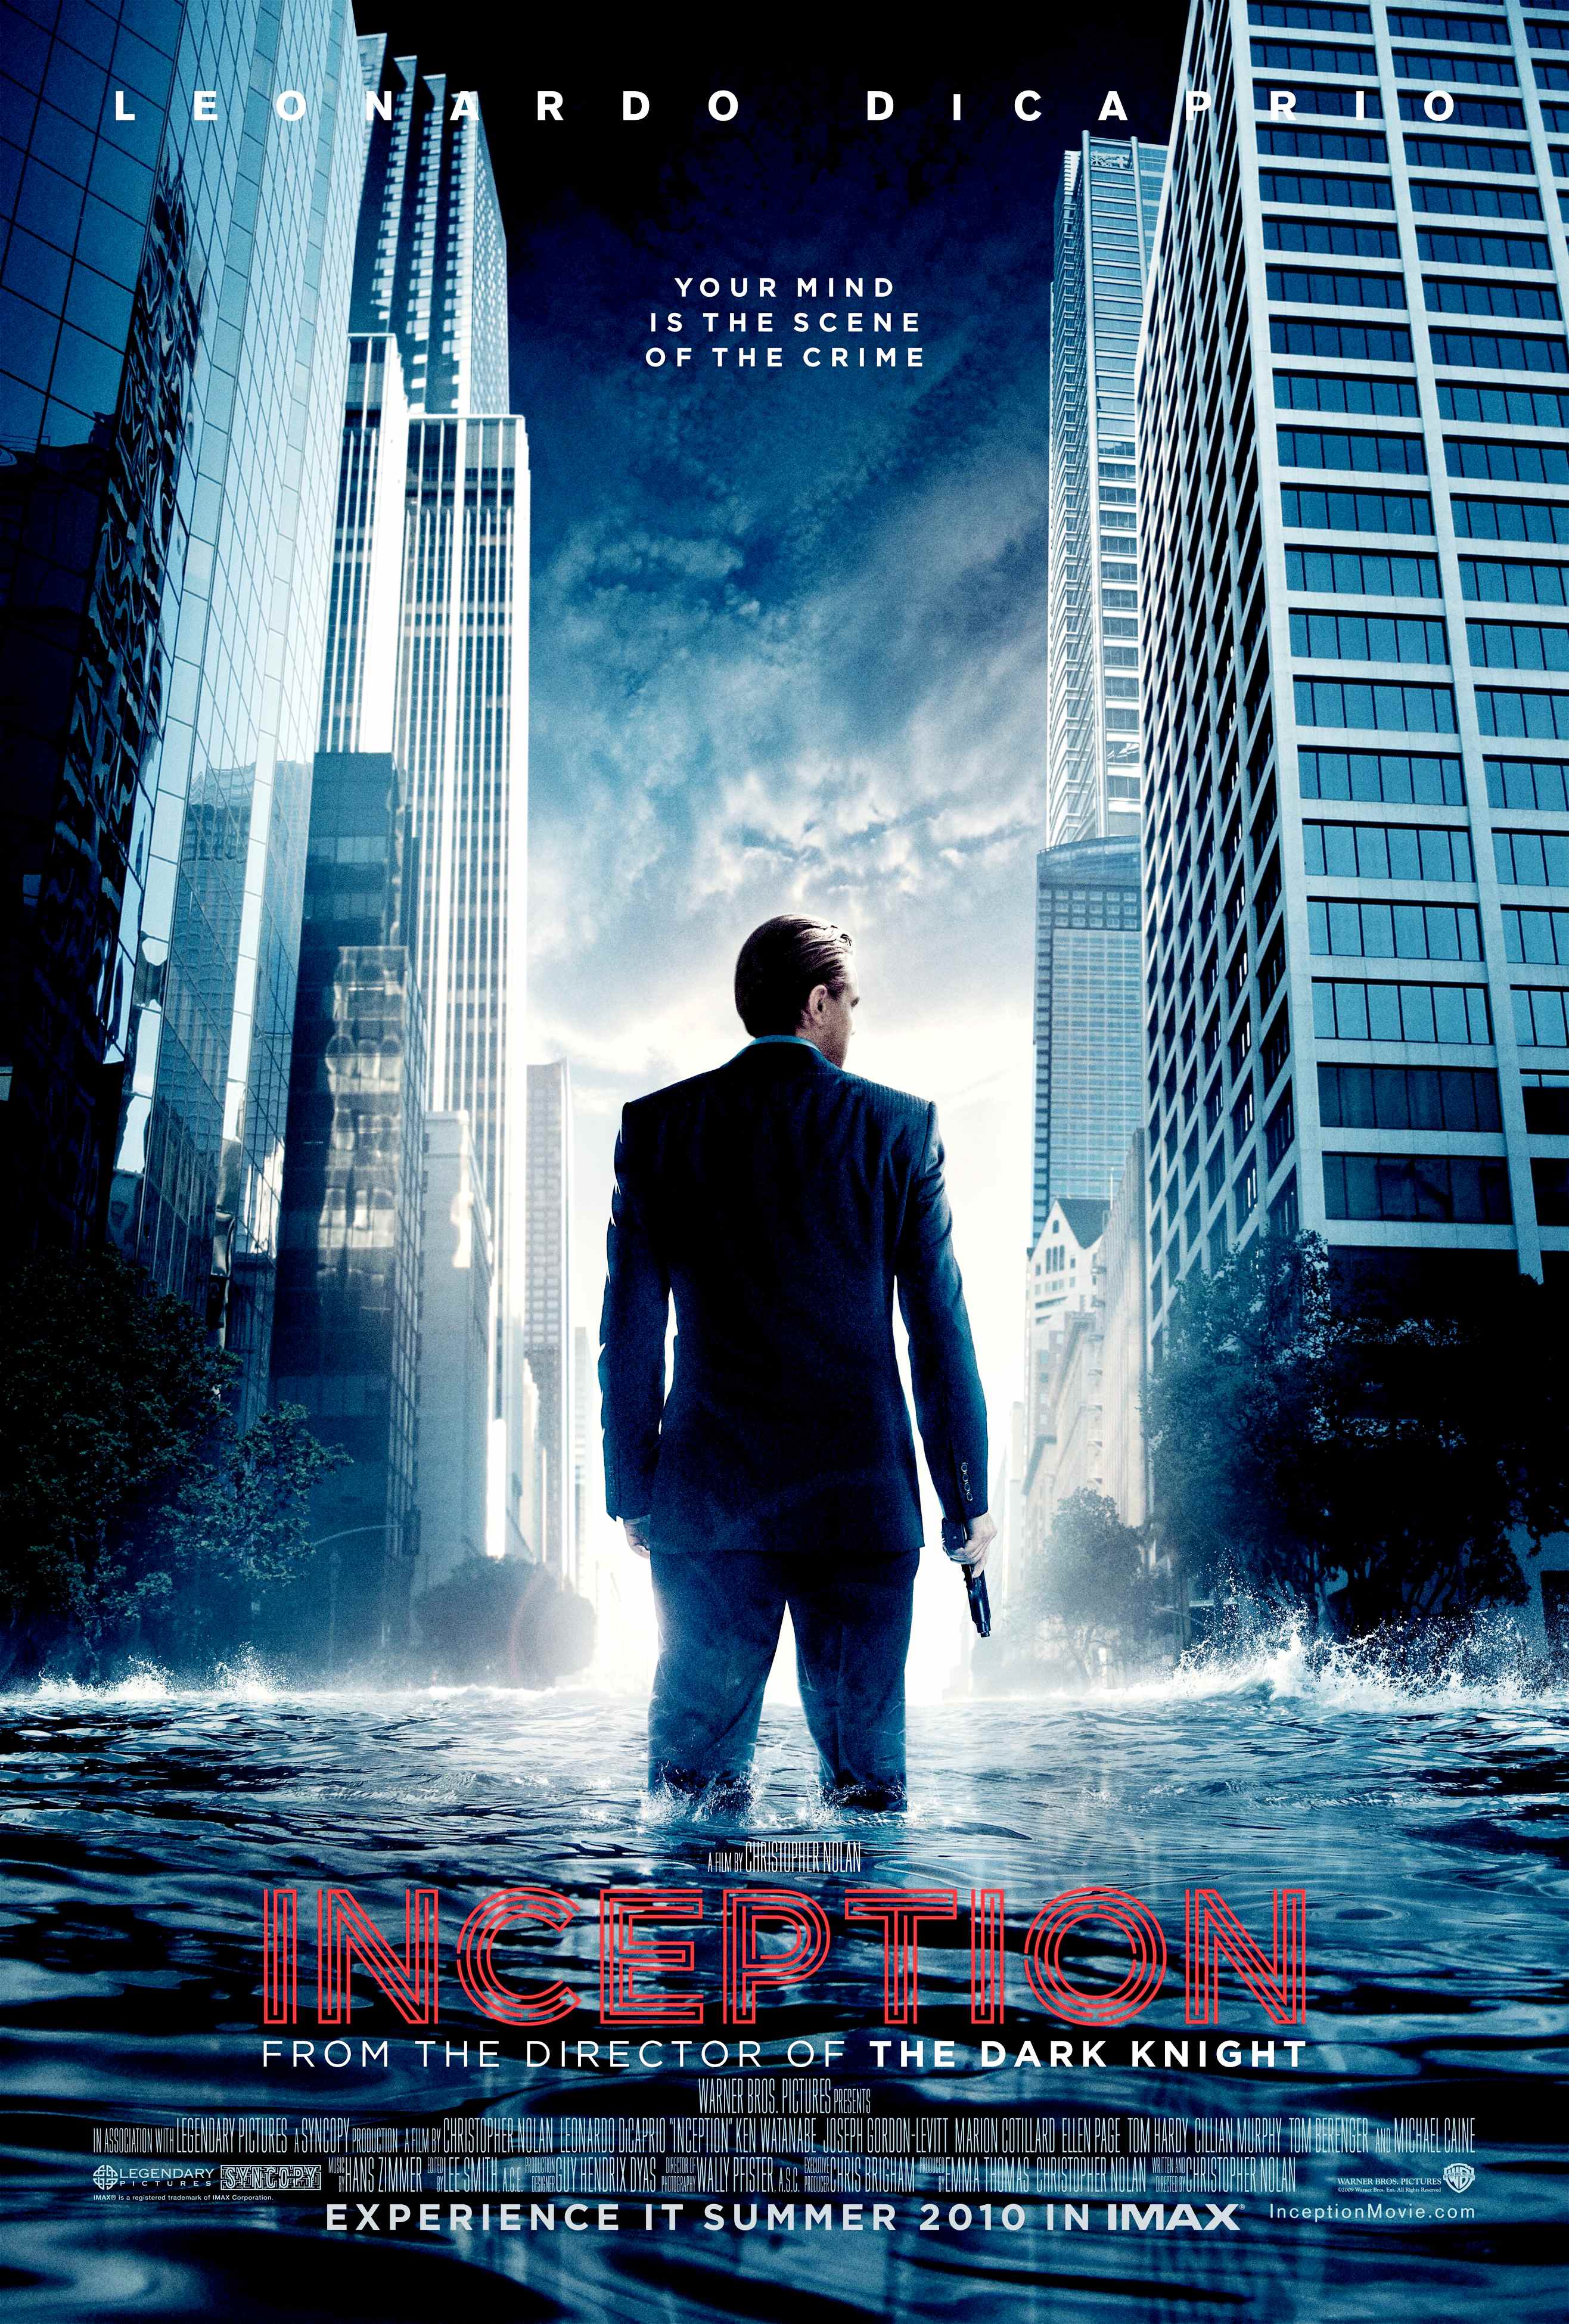 Inception is one of the most stylish and memorable movies of recent years.